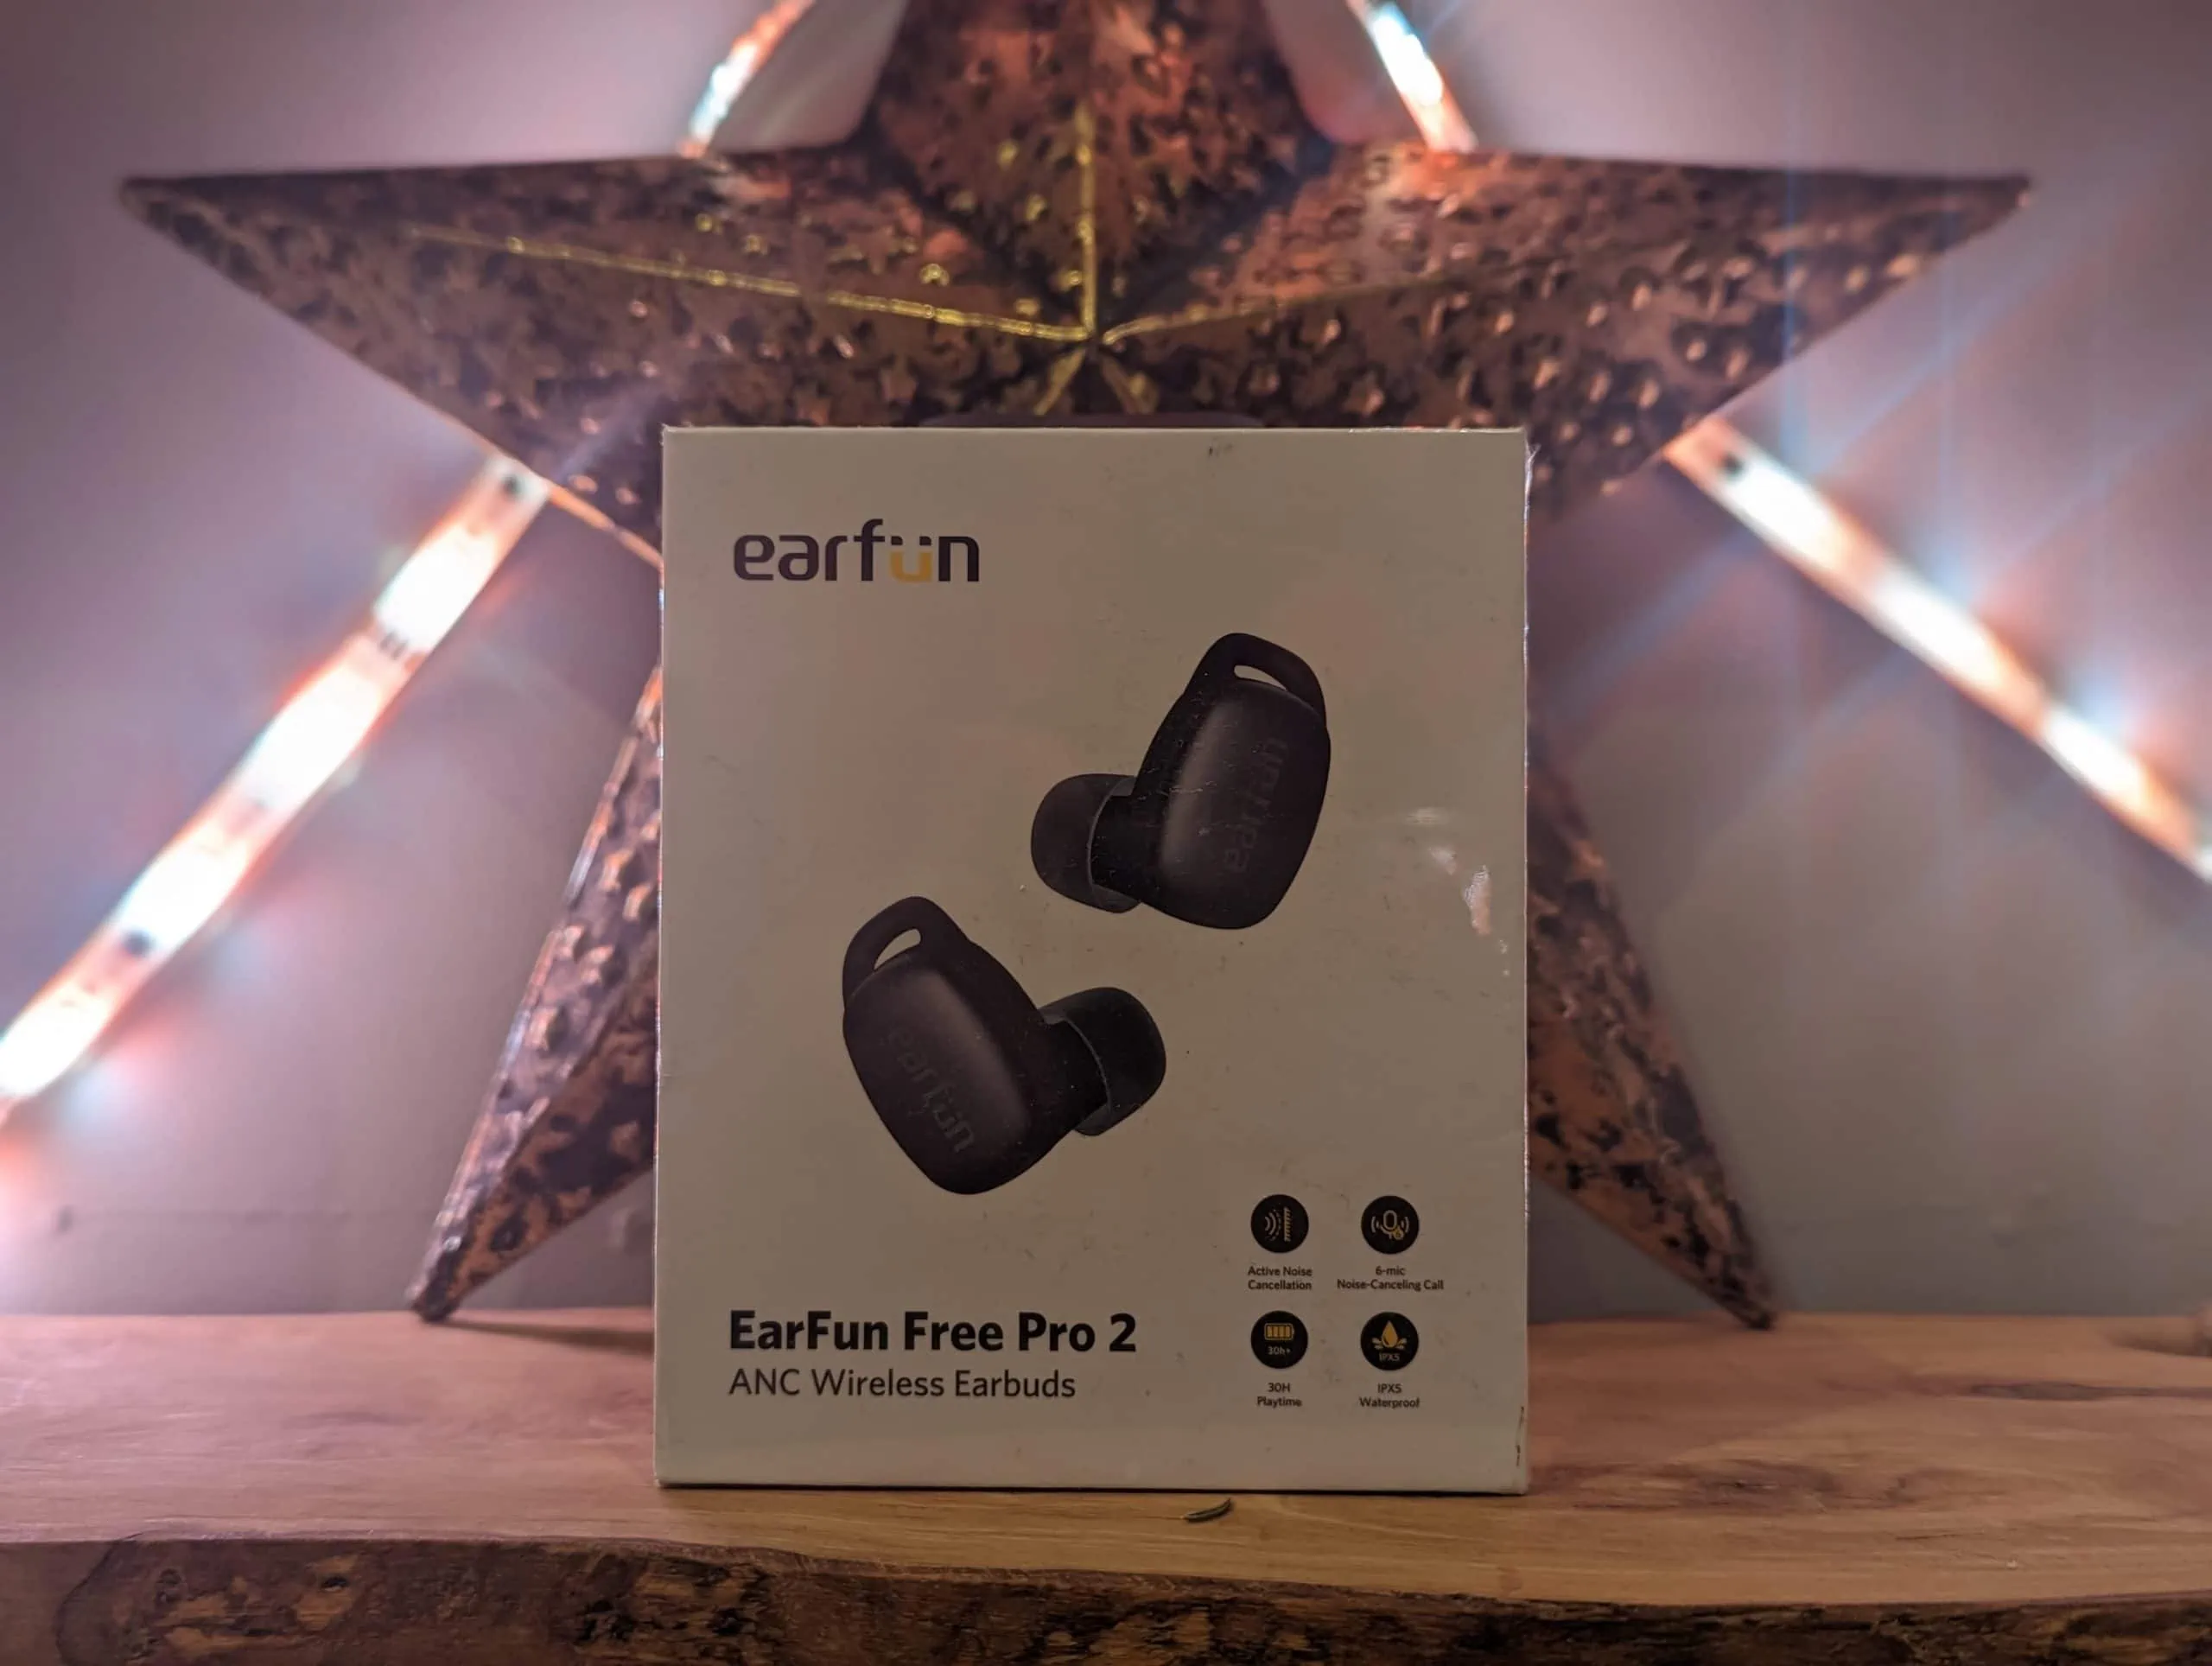 Competition: Win a Pair of EarFun Free Pro 2 ANC Wireless Earbuds